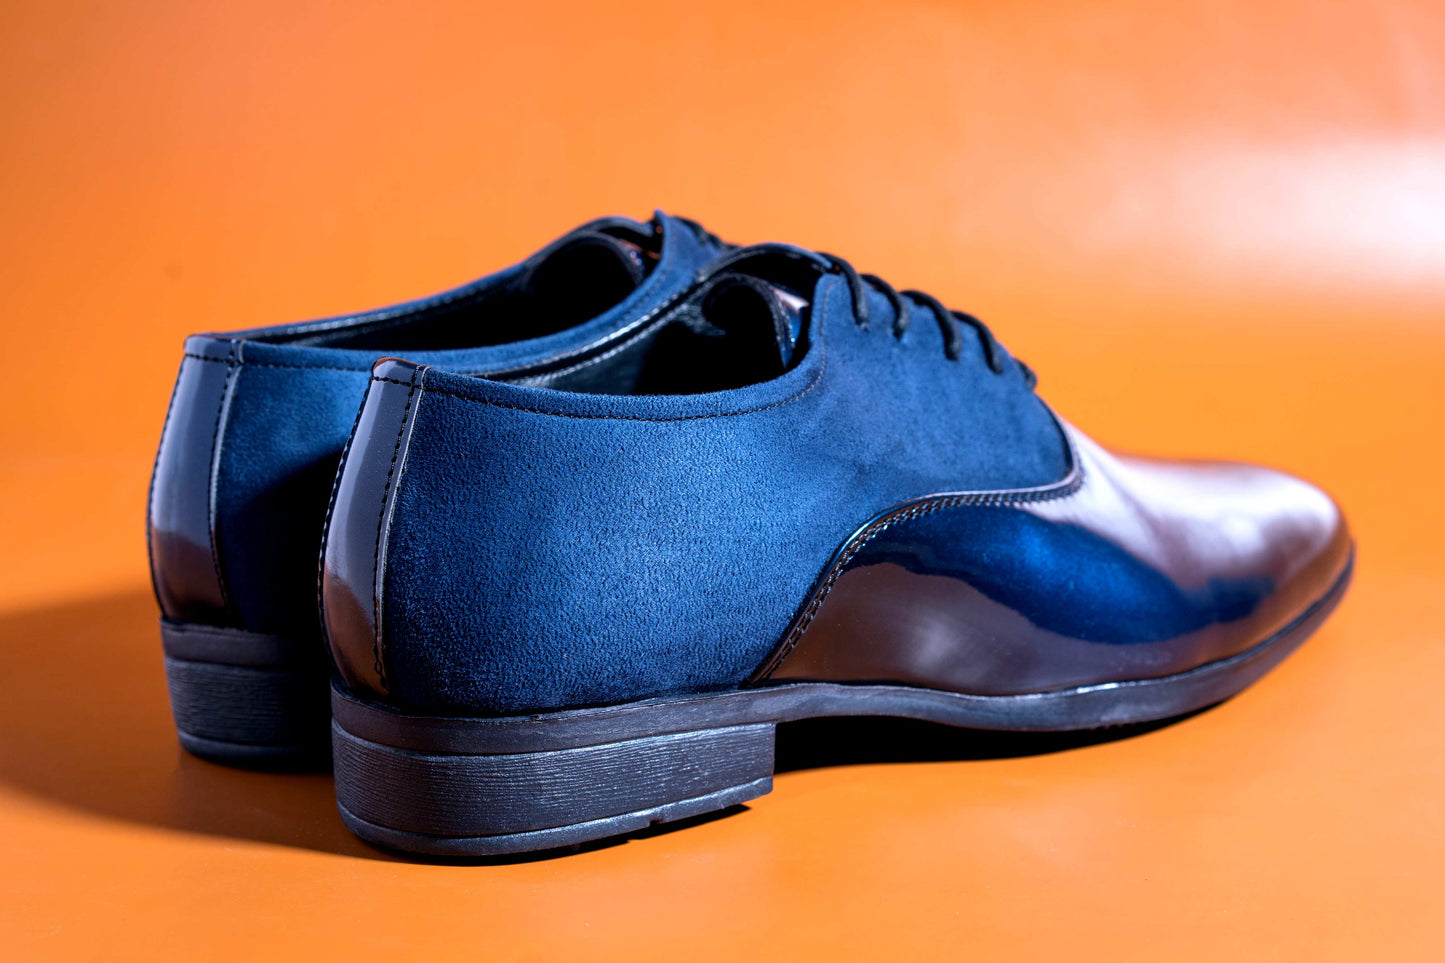 New Fashion Elegant And Classy Shiny Blue Formal Suede Shoes For Men-JonasParamount